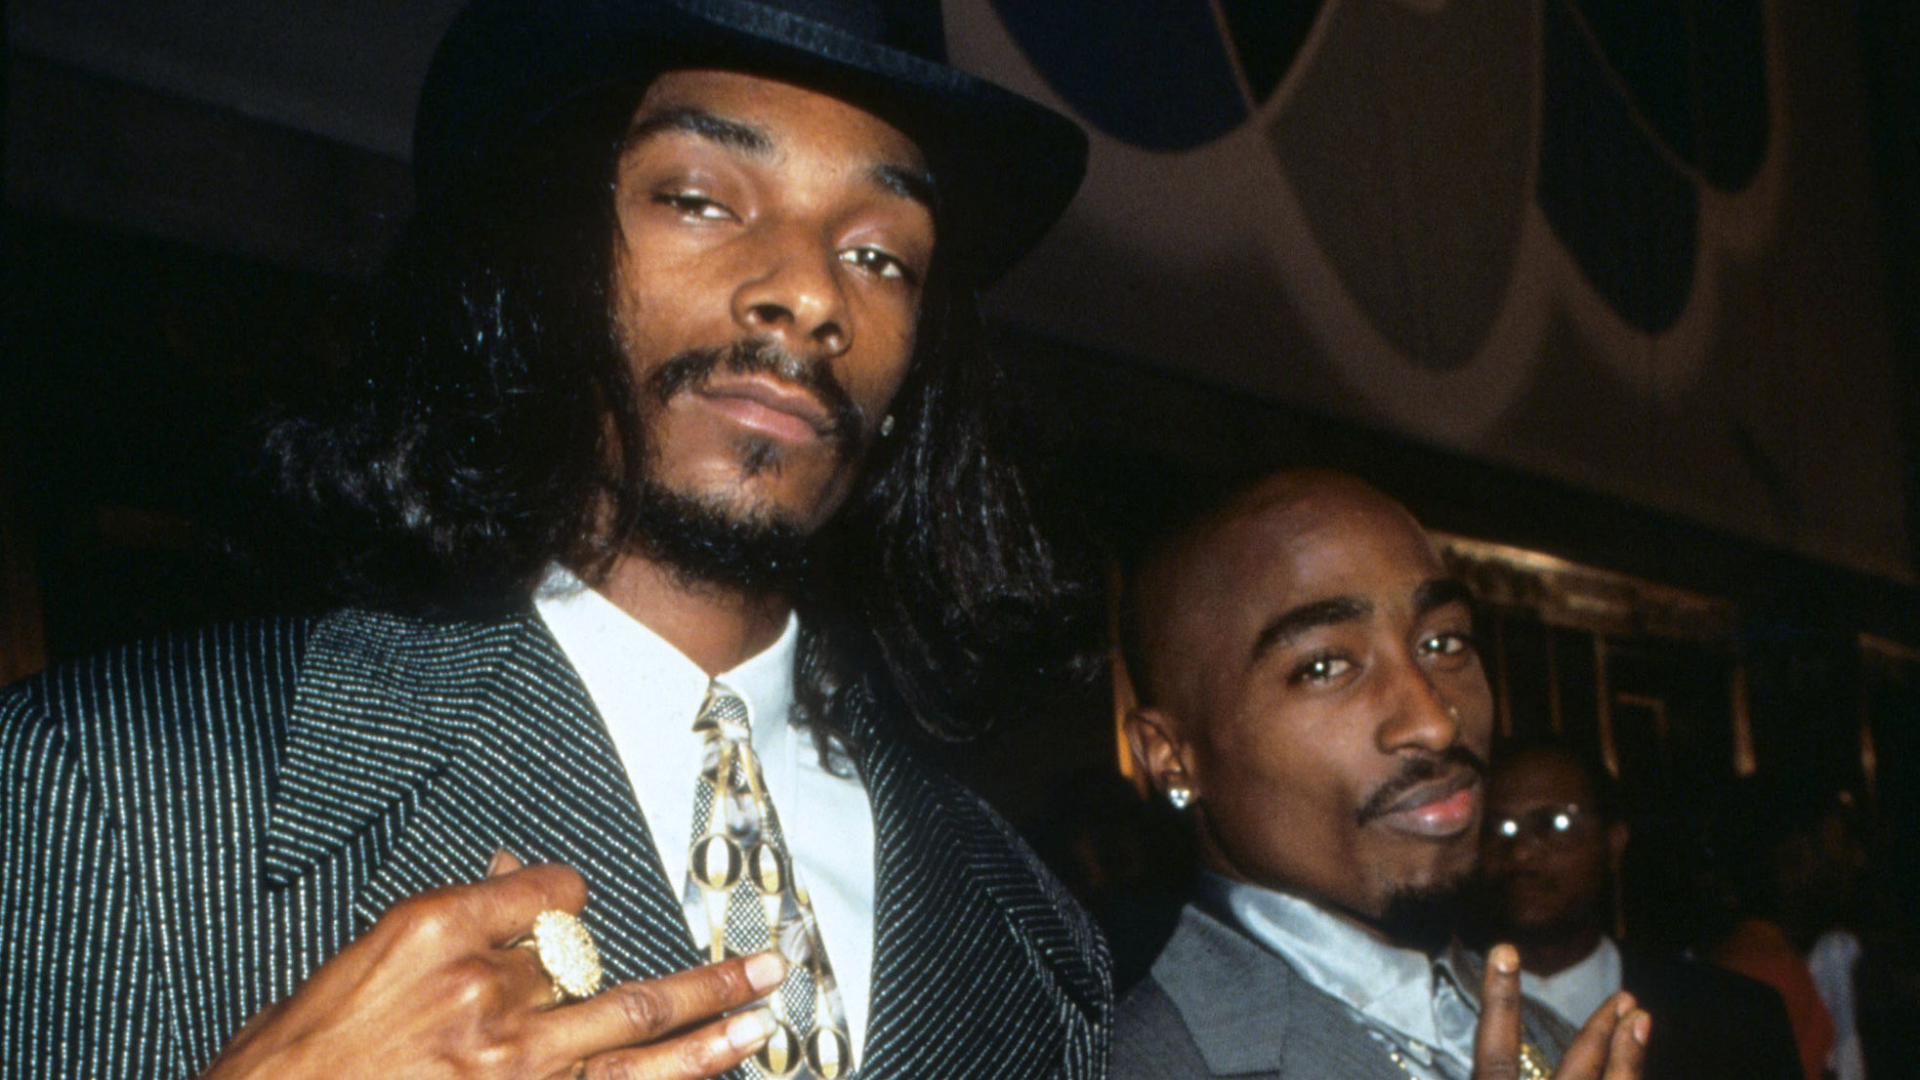 Snoop Dogg Took The Backseat To Let 2Pac Run The Show, Says Director Allen  Hughes